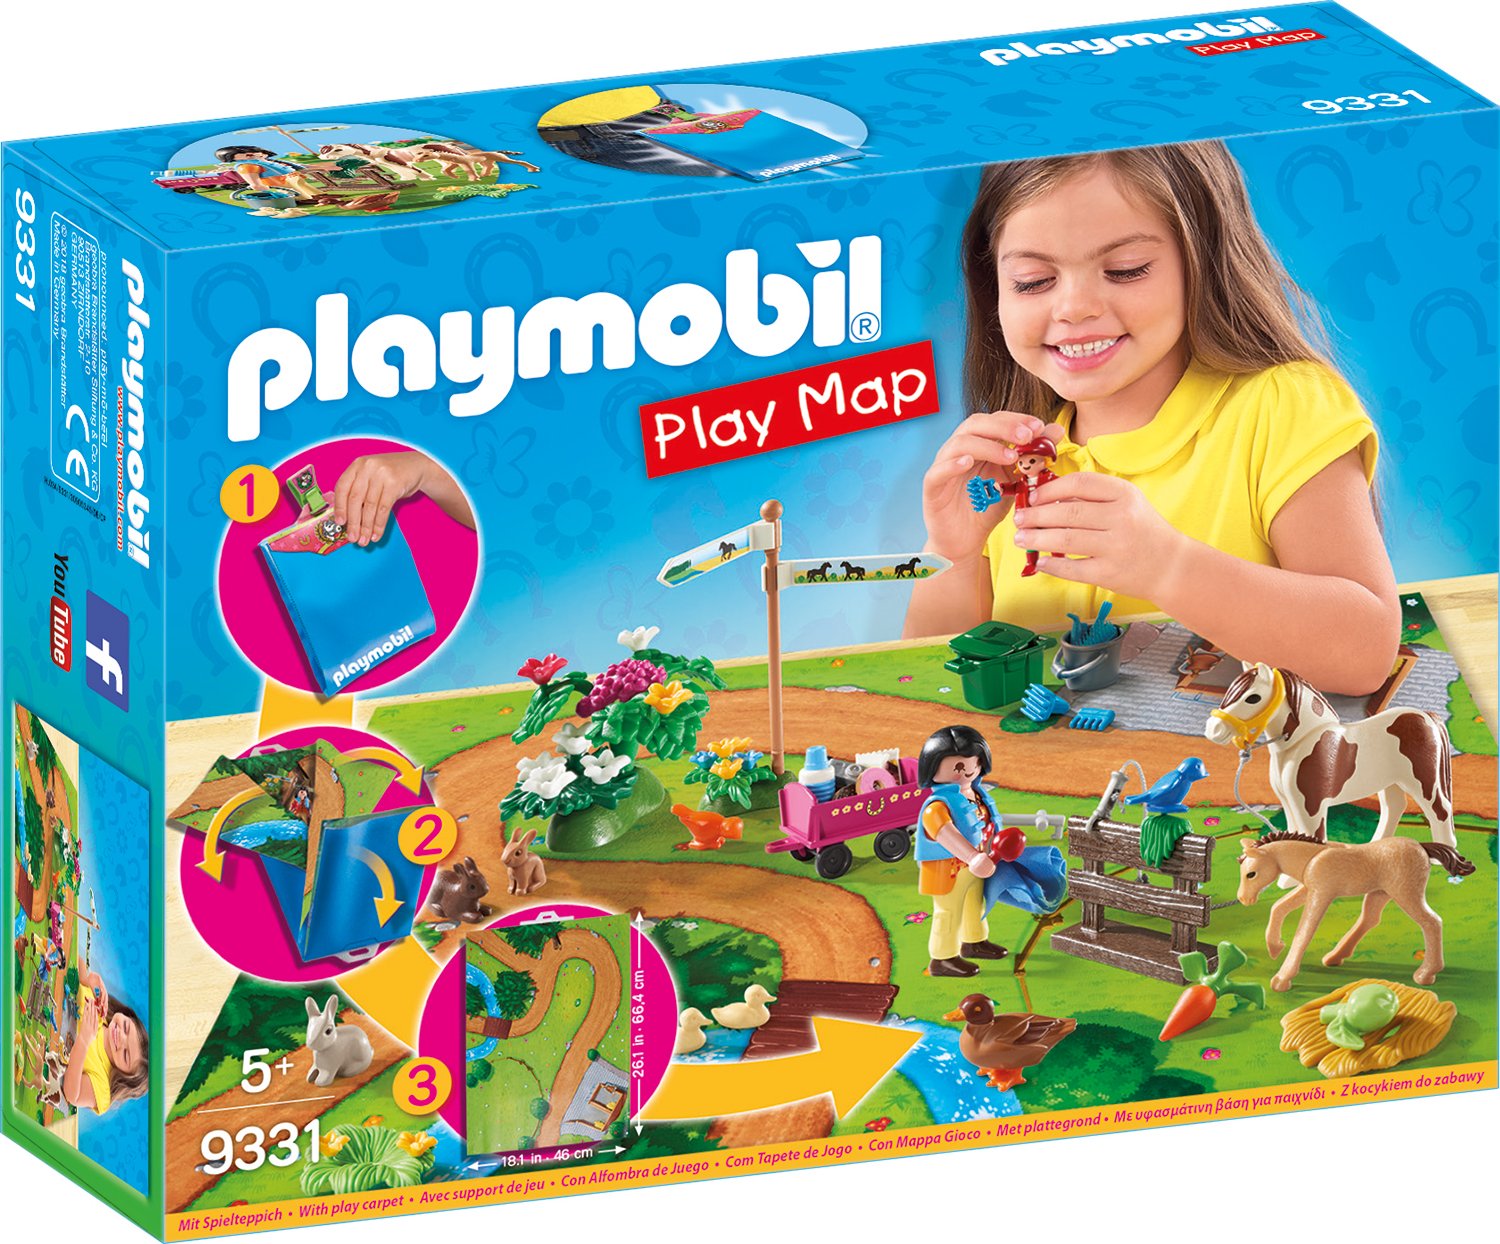 Playmobil 9331 Play Map Pony Outing Play